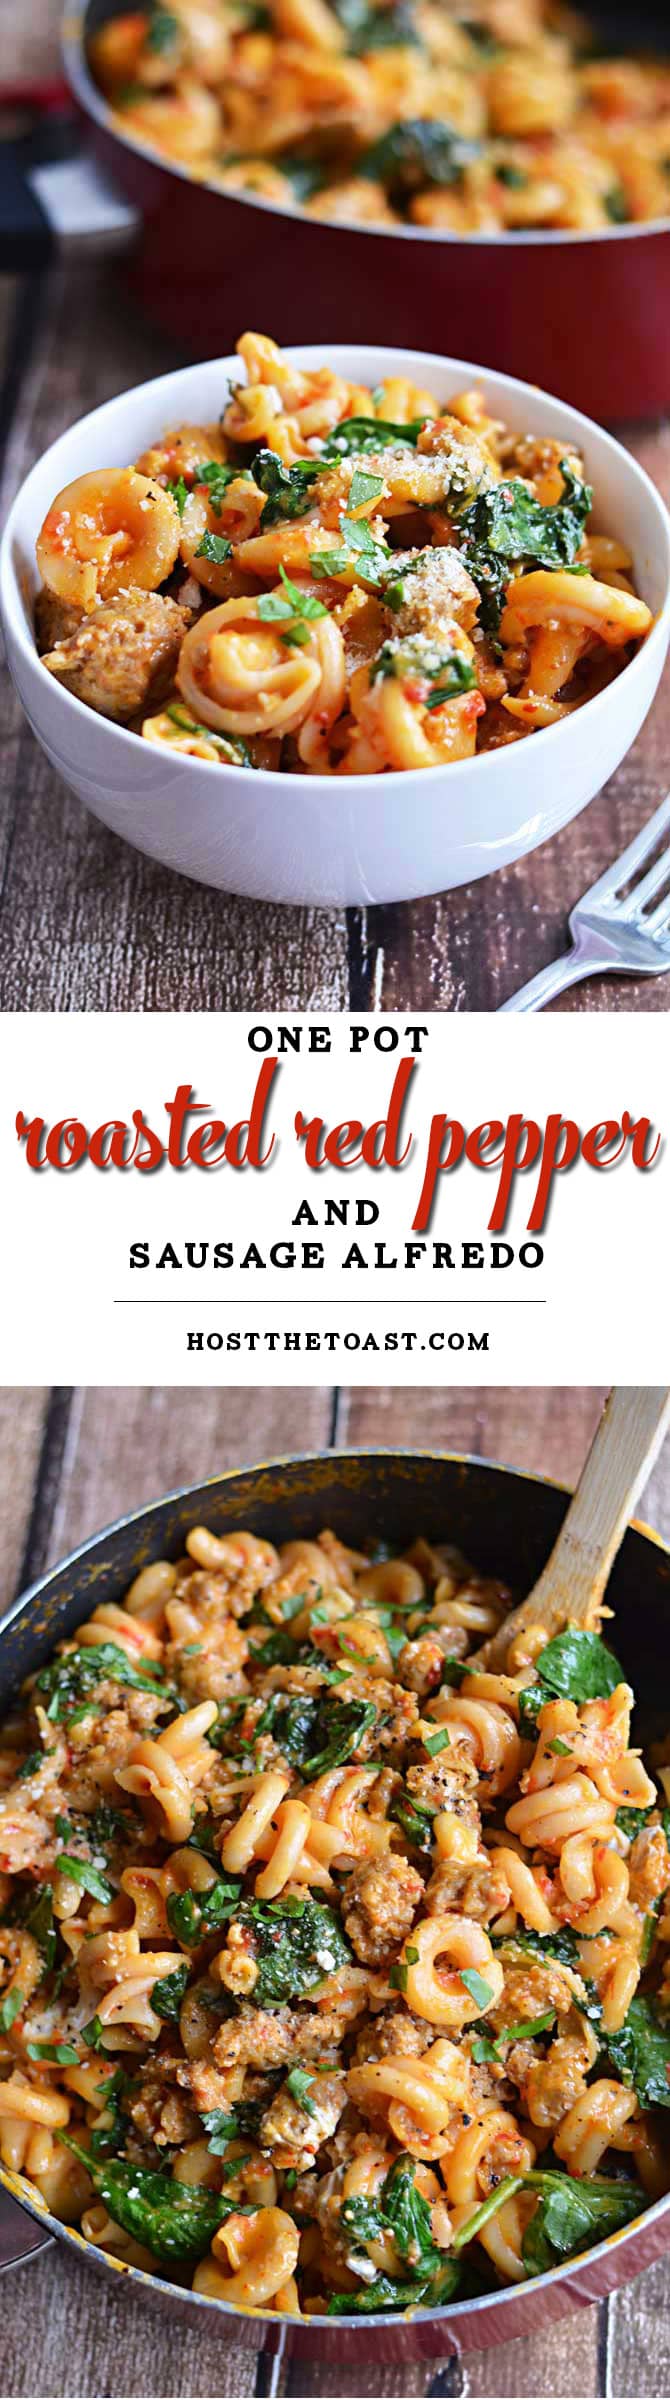 One Pot Roasted Red Pepper and Sausage Alfredo. Roasted red peppers, Italian sausage, spinach, garlic, and goat cheese, all with only one pot to clean? Count me in. | hostthetoast.com